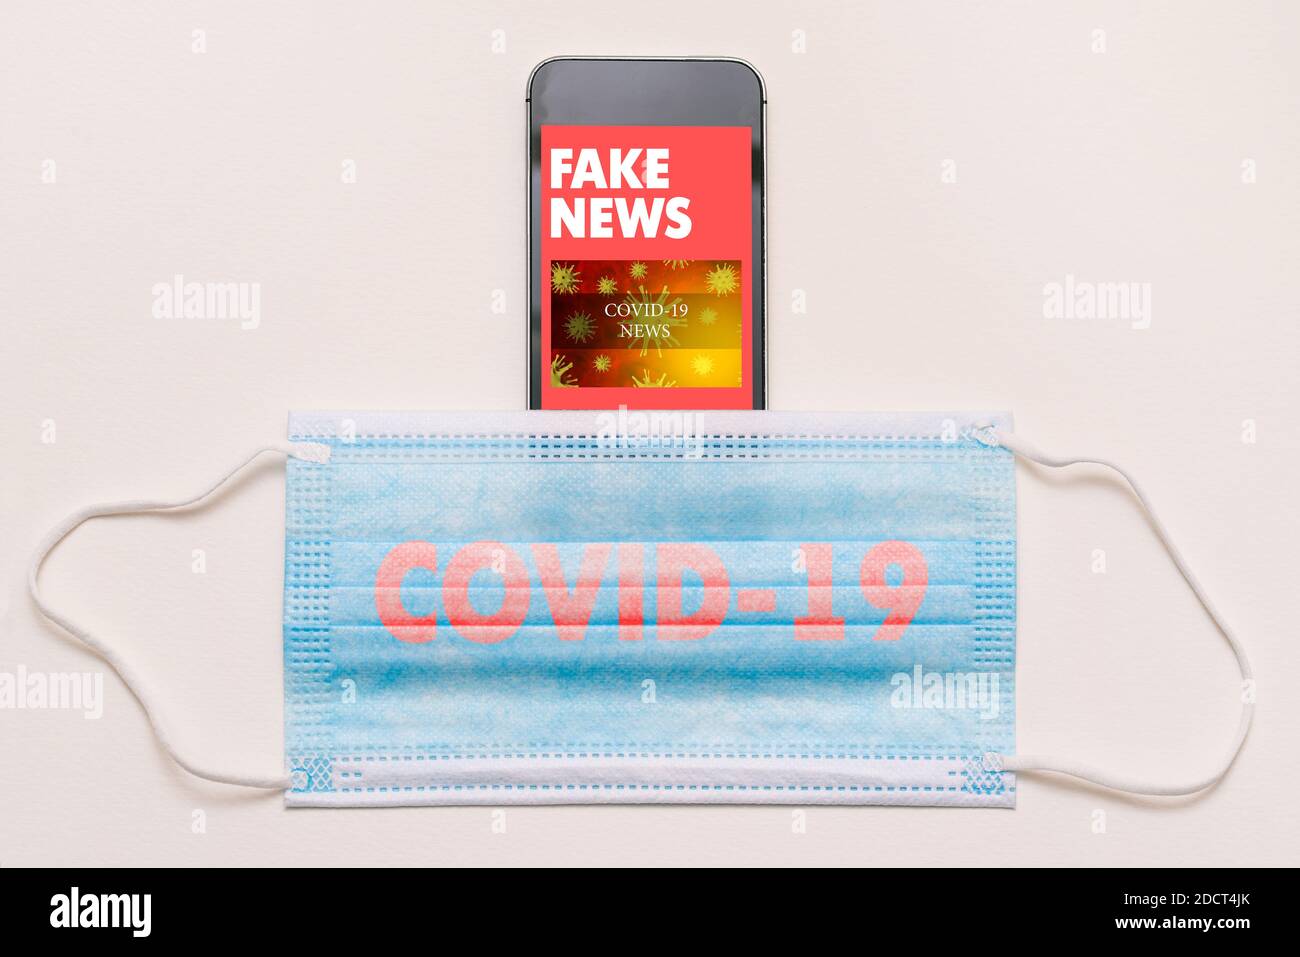 Fake news concept on coronavirus theme. Mobile phone and medical mask with COVID-19 text. News feed on smartphone screen with fake articles. Stock Photo